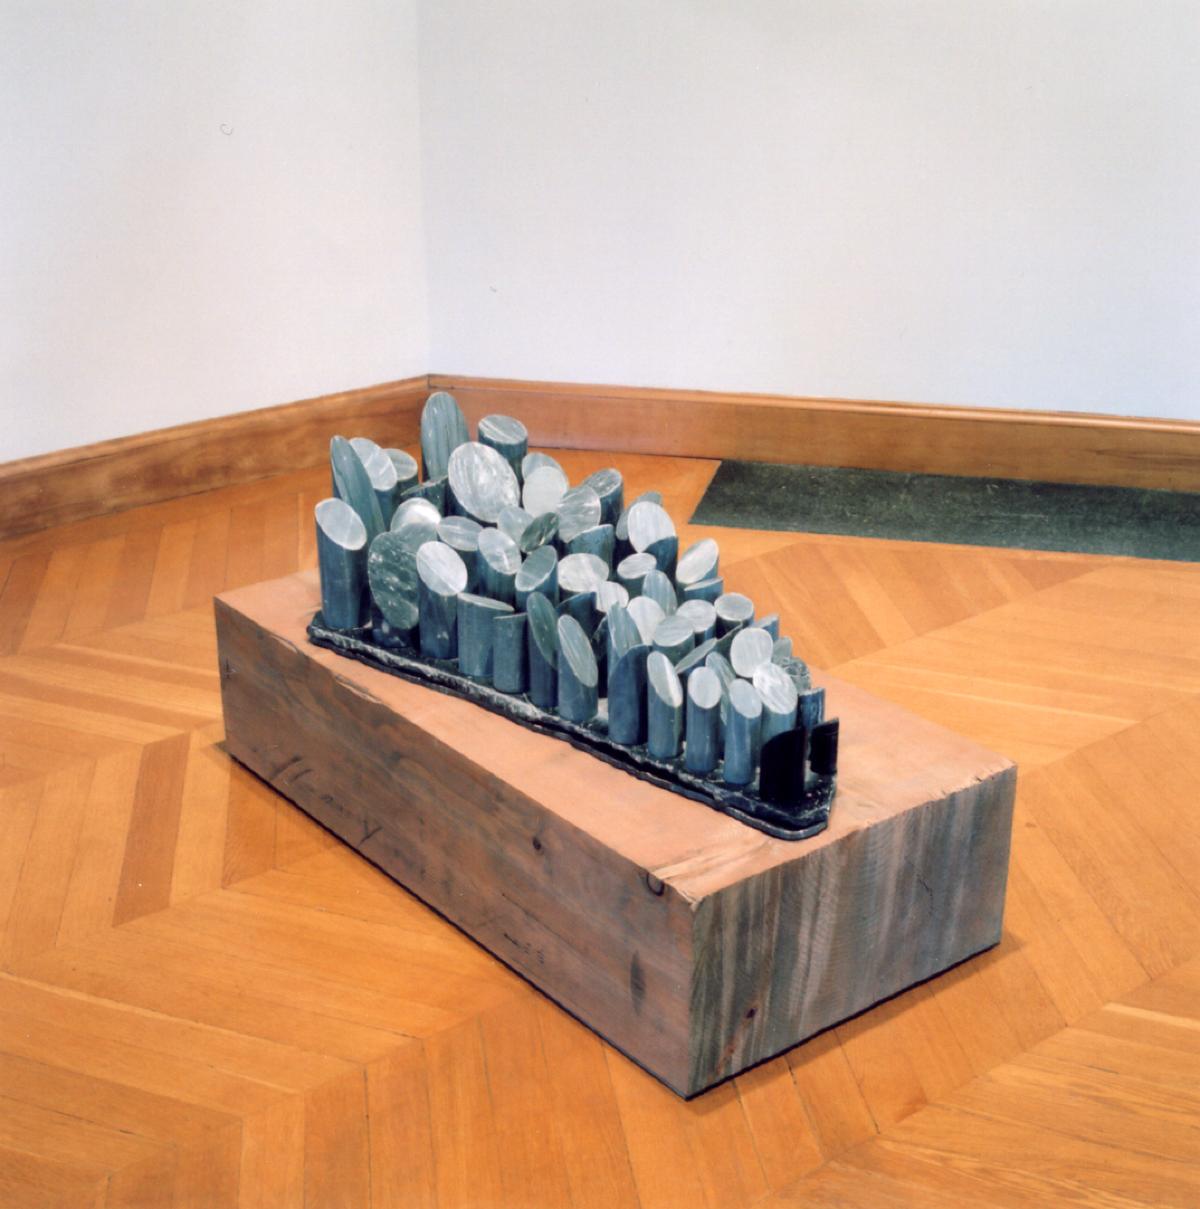 Louise Bourgeois, <em>Gray Fountain</em>, 1970-71 (installation view, 2007)